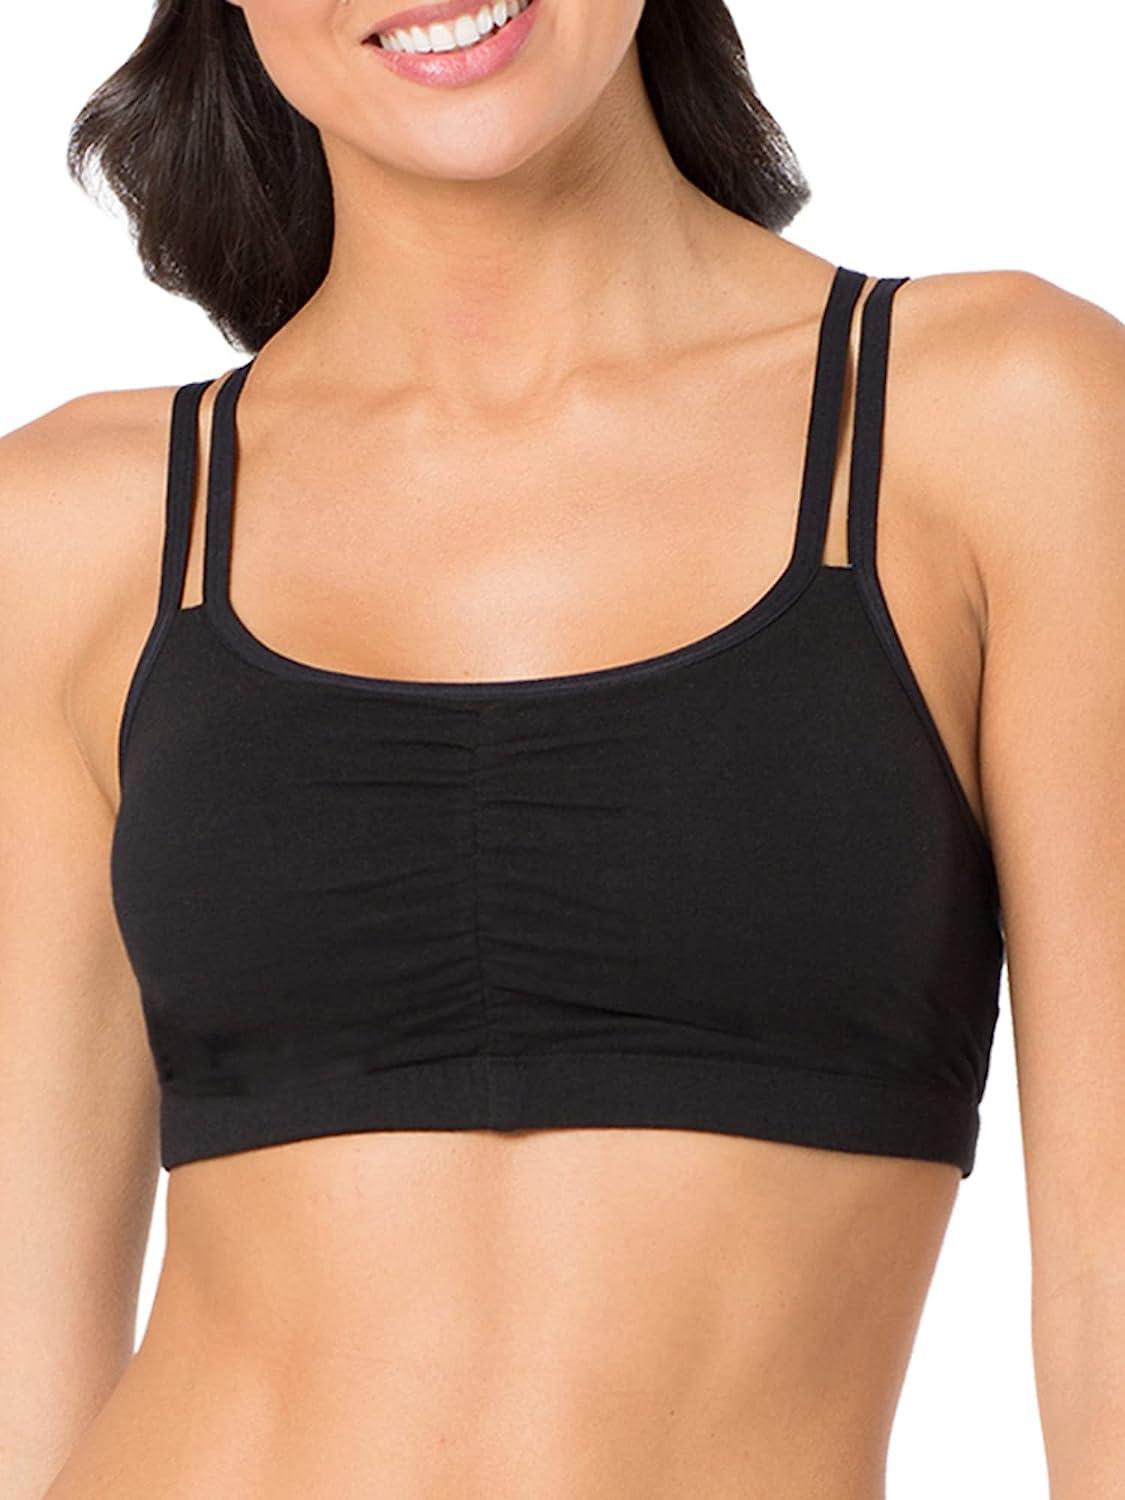 Fruit of the Loom Women's Adjustable Shirred Front Racerback Sports Bra 3  Grey With Black/White/